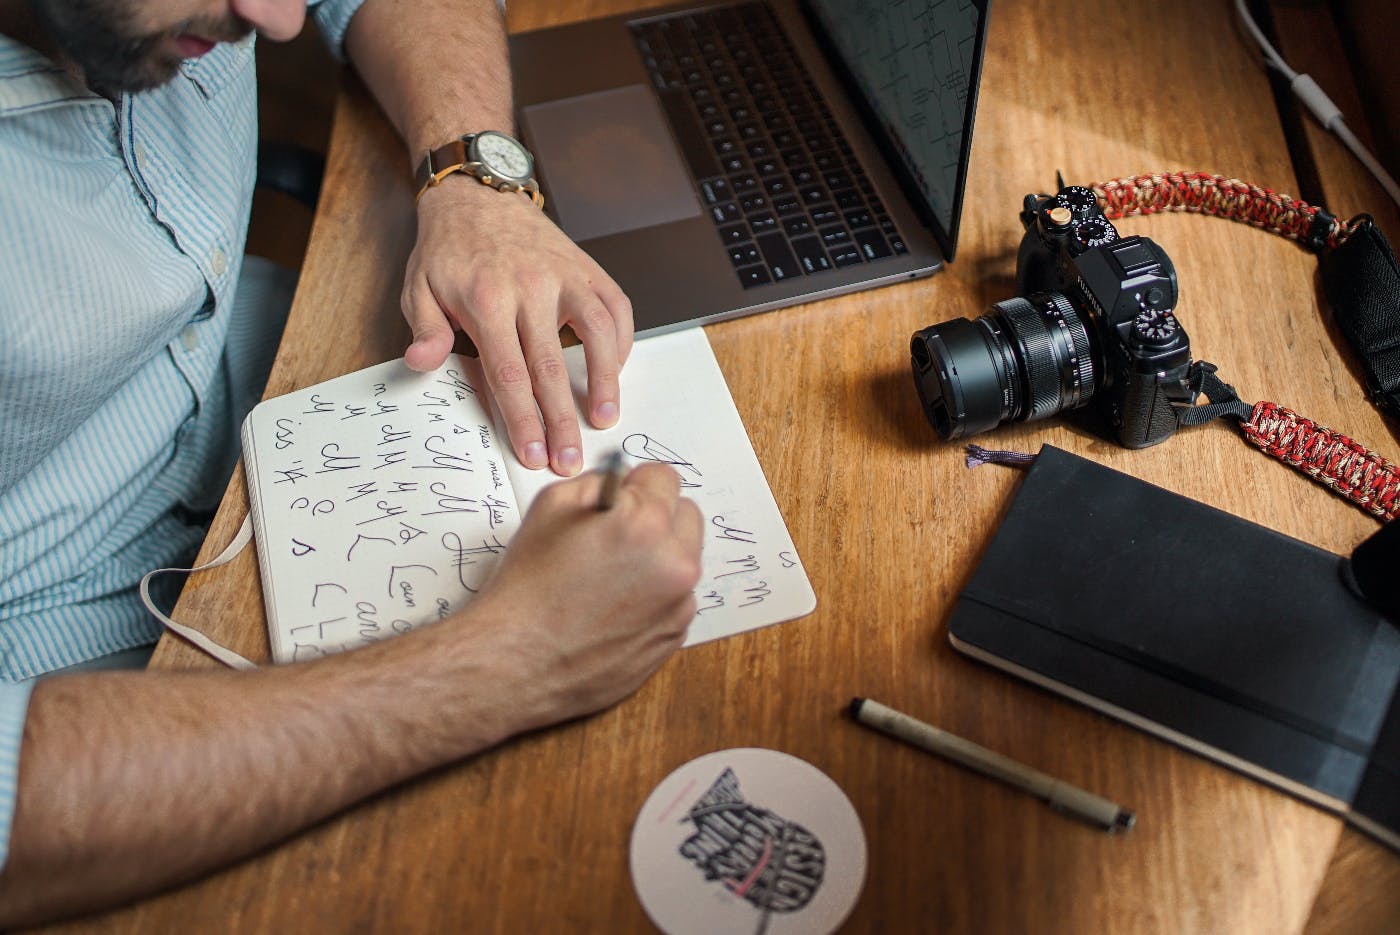 A guy sitting at a table with a camera, Moleskine, pen and he's working on a logo in a notebook